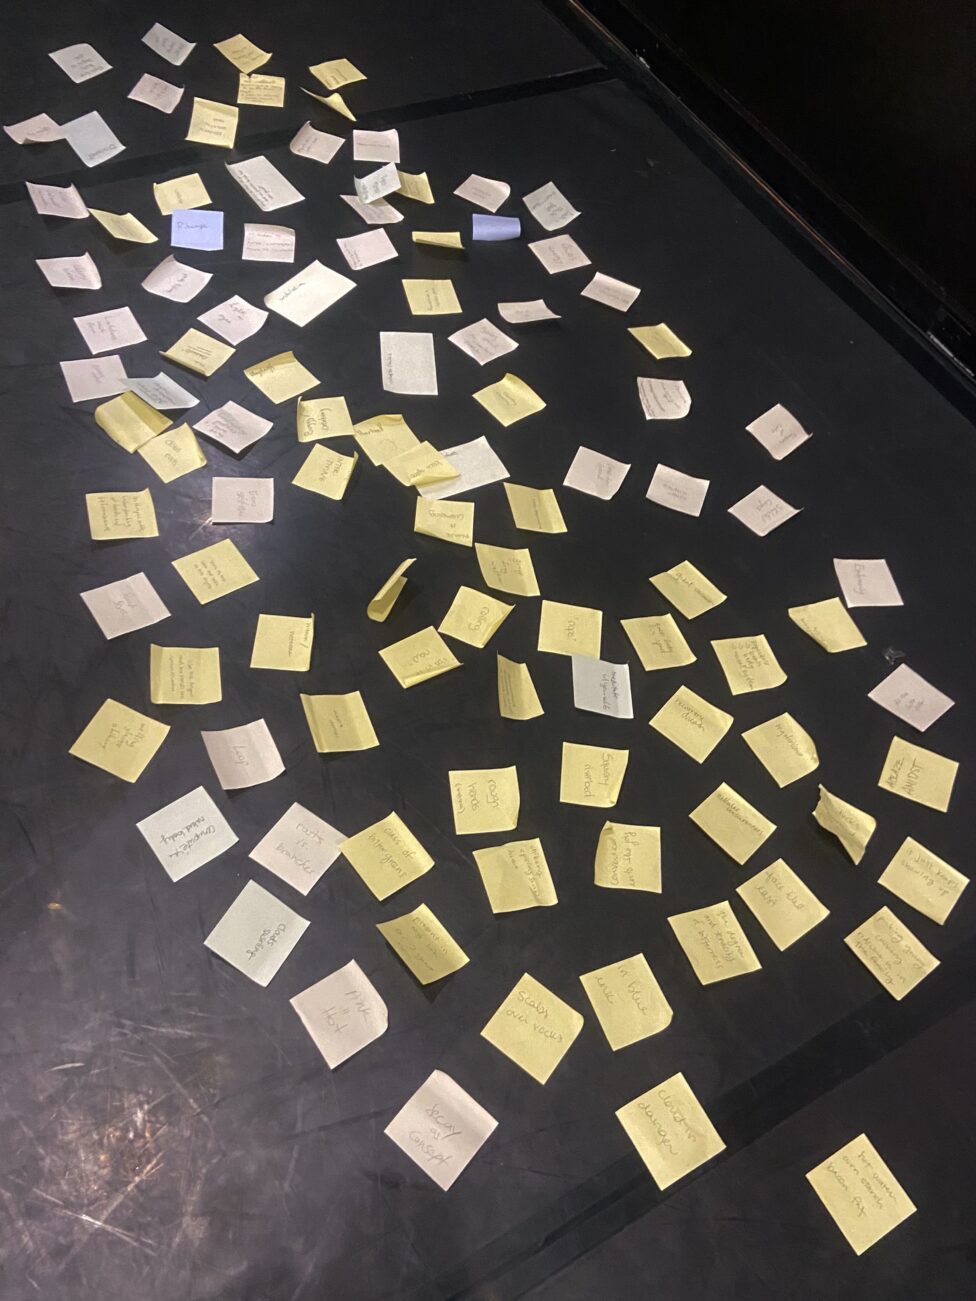 A word cloud created with post-it notes spread out on the floor. Some of the words and phrases include: roots vs. branches, rolling, rough hands, and ribcage. 